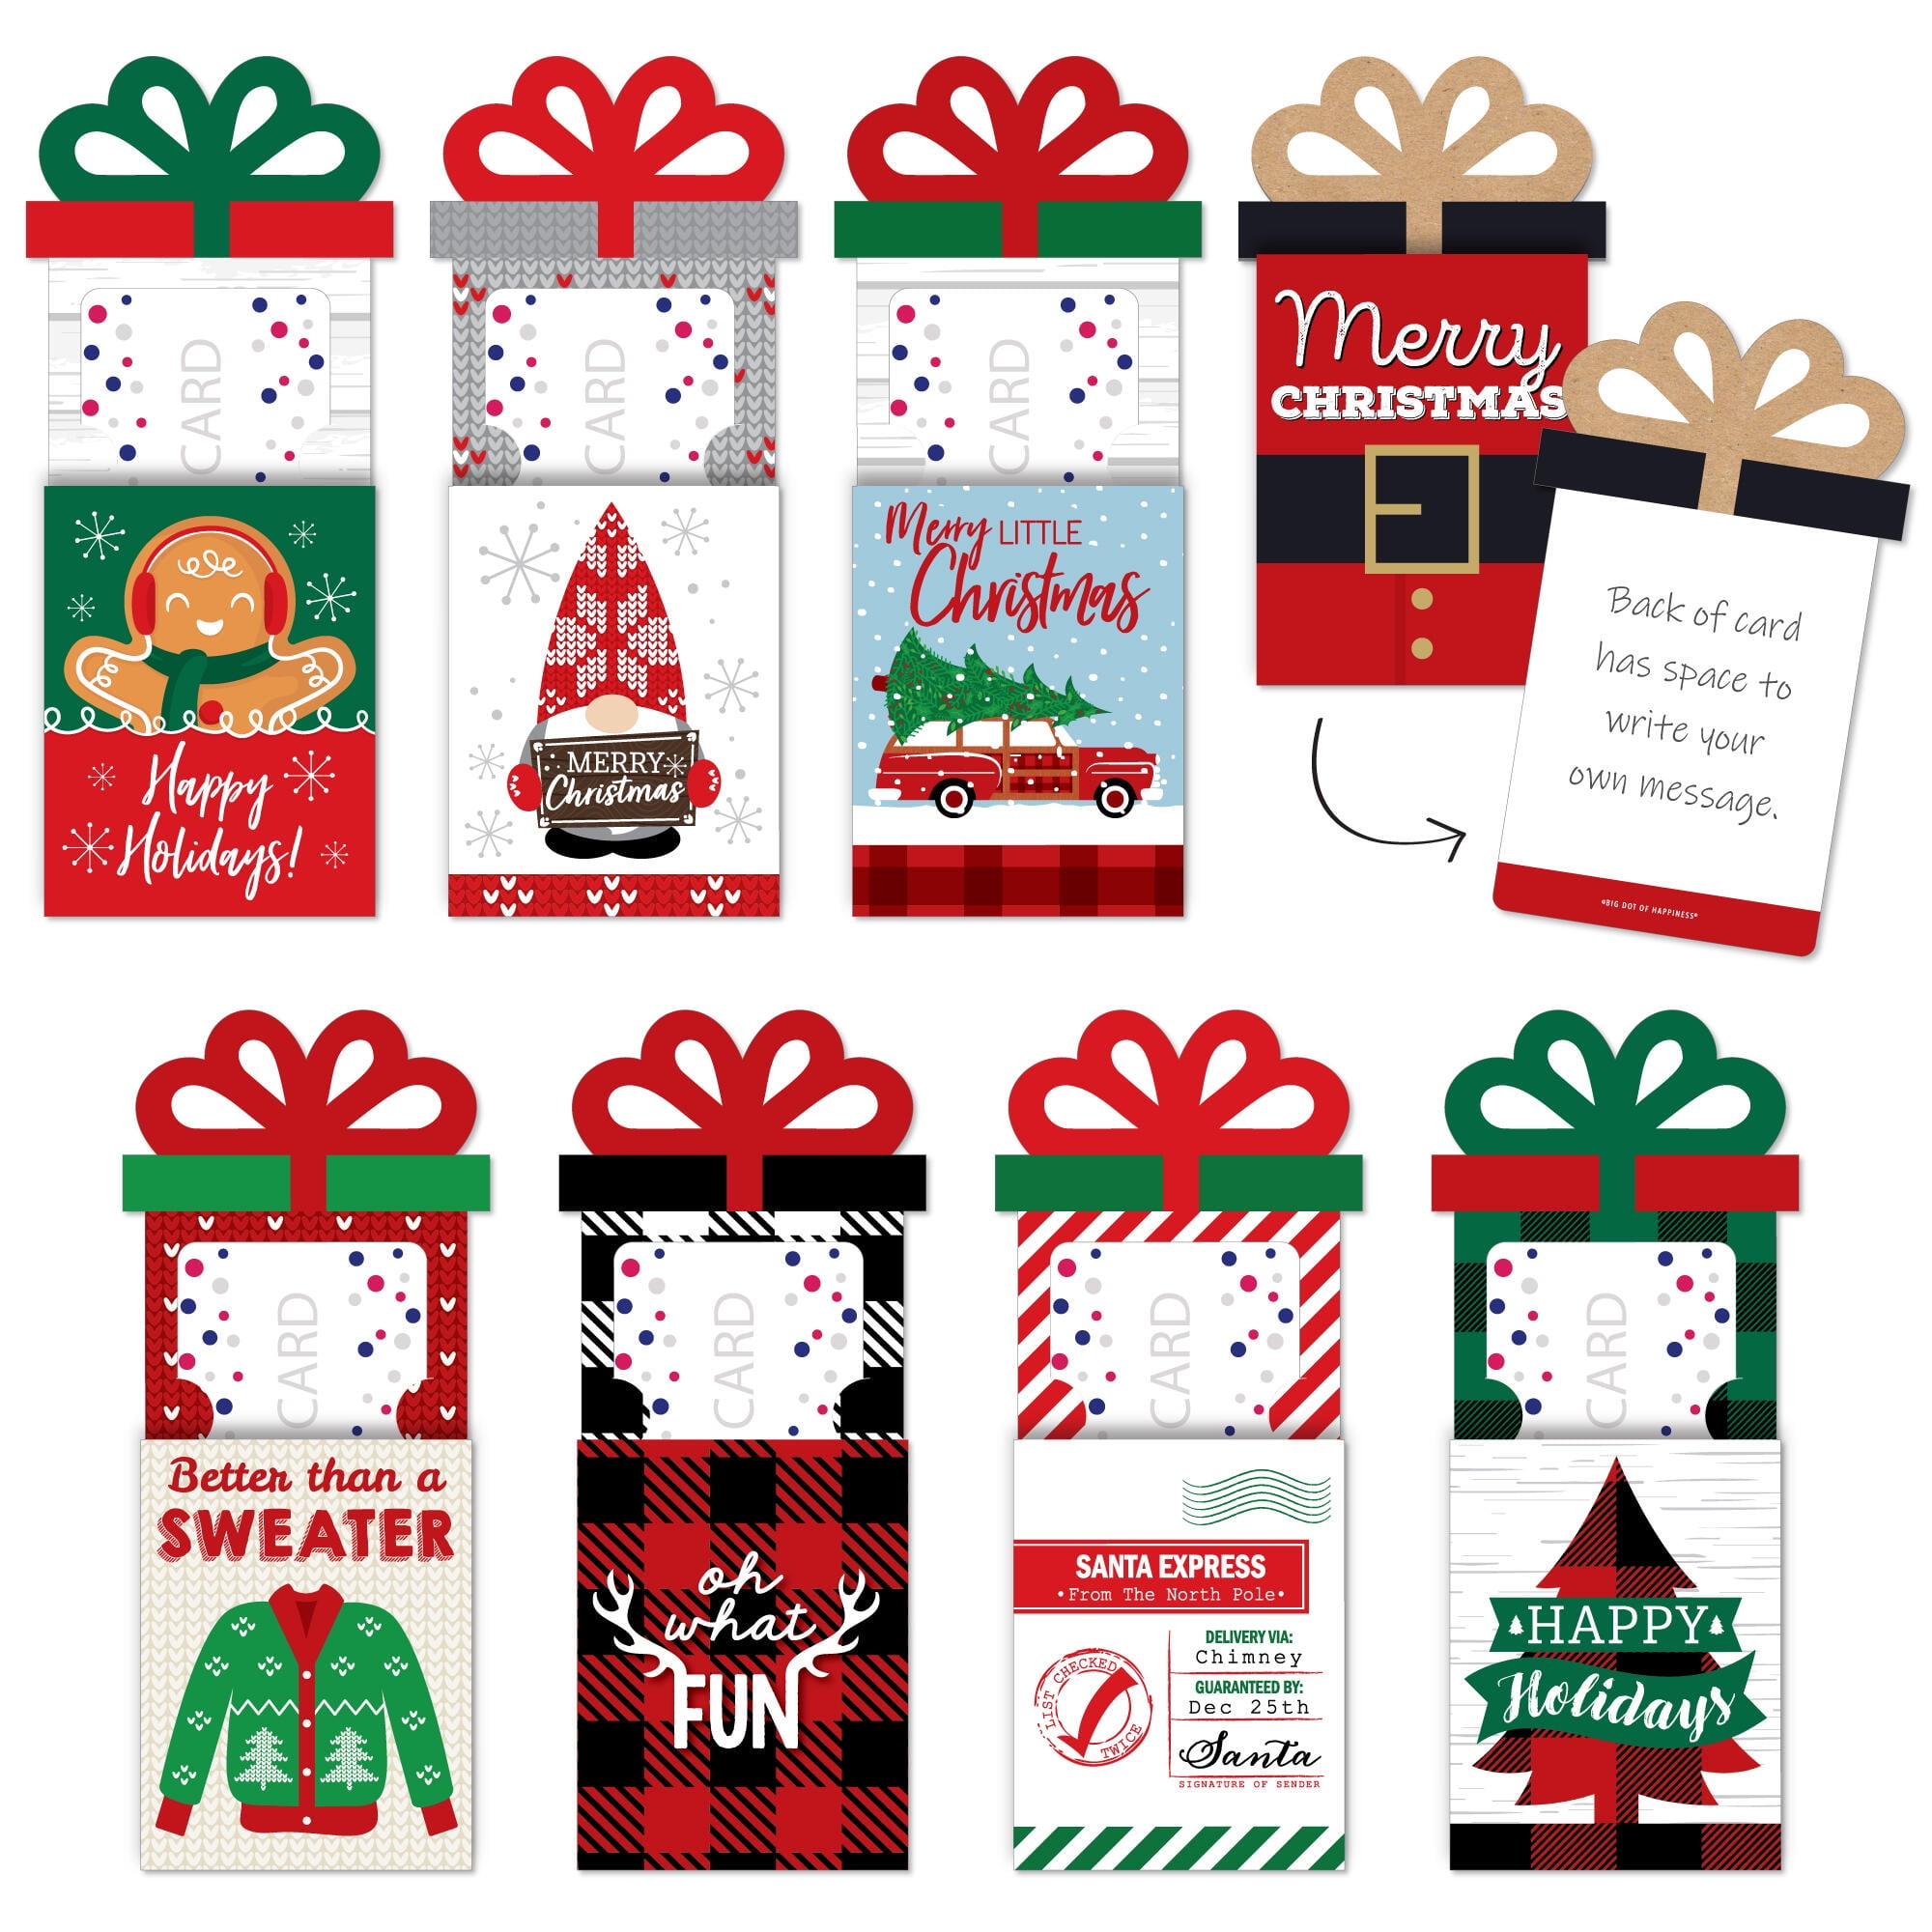 Pack MONEY/GIFT CARD HOLDER w/Envelopes *YOU CHOOSE* New! HOLIDAY/CHRISTMAS* 1 